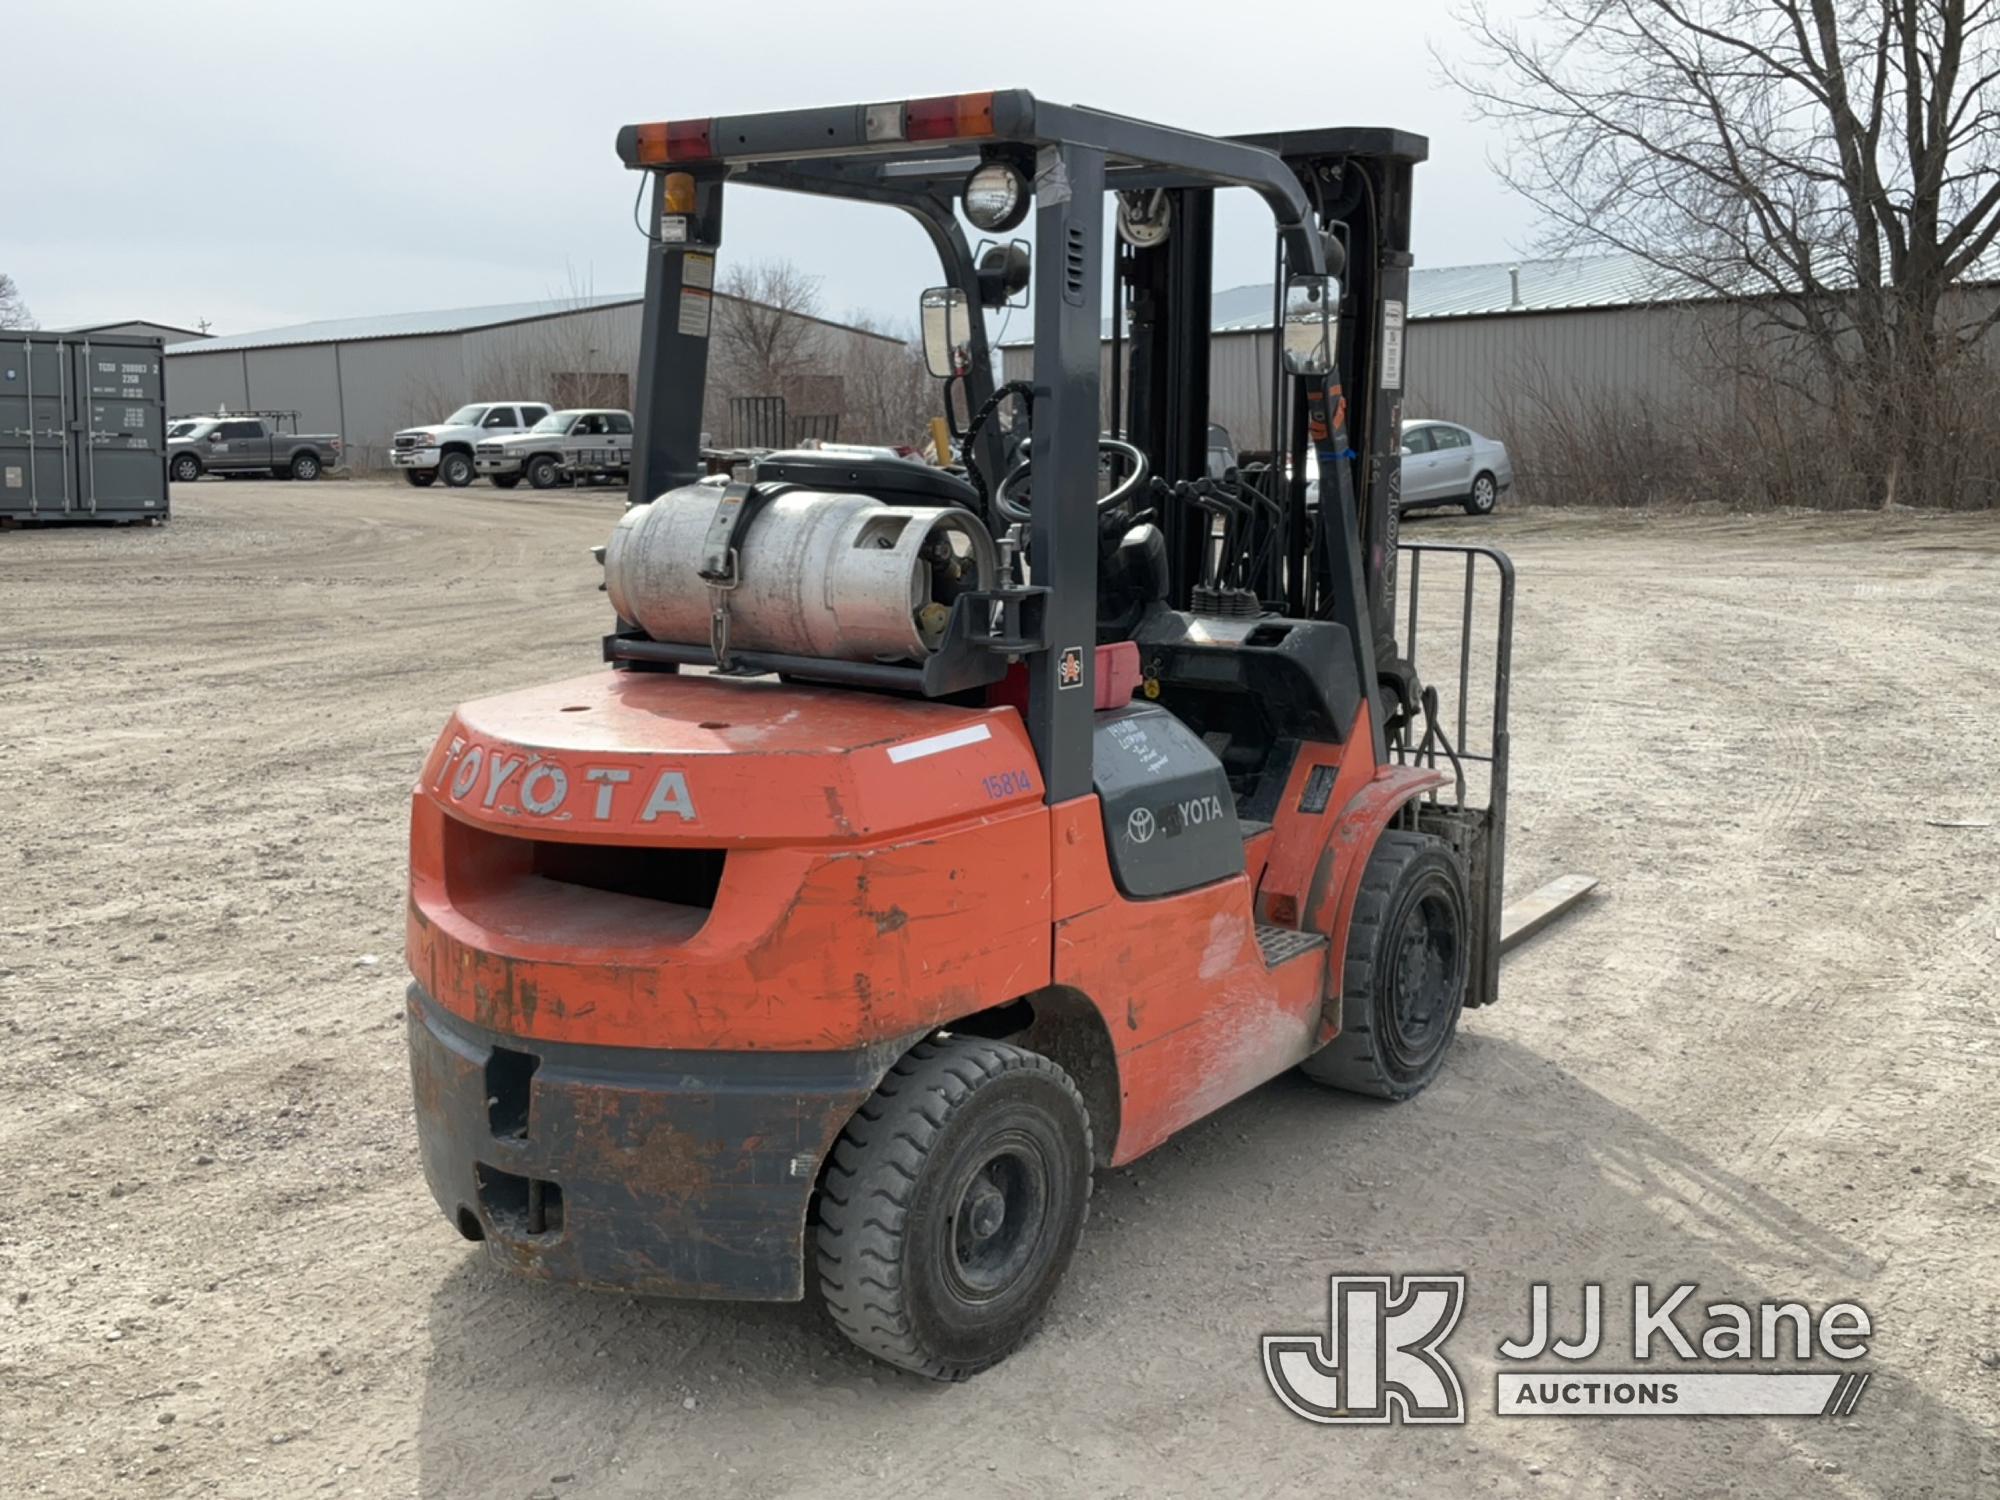 (Des Moines, IA) 2005 Toyota 7FGU32 Pneumatic Tired Forklift Runs, Moves, Operates